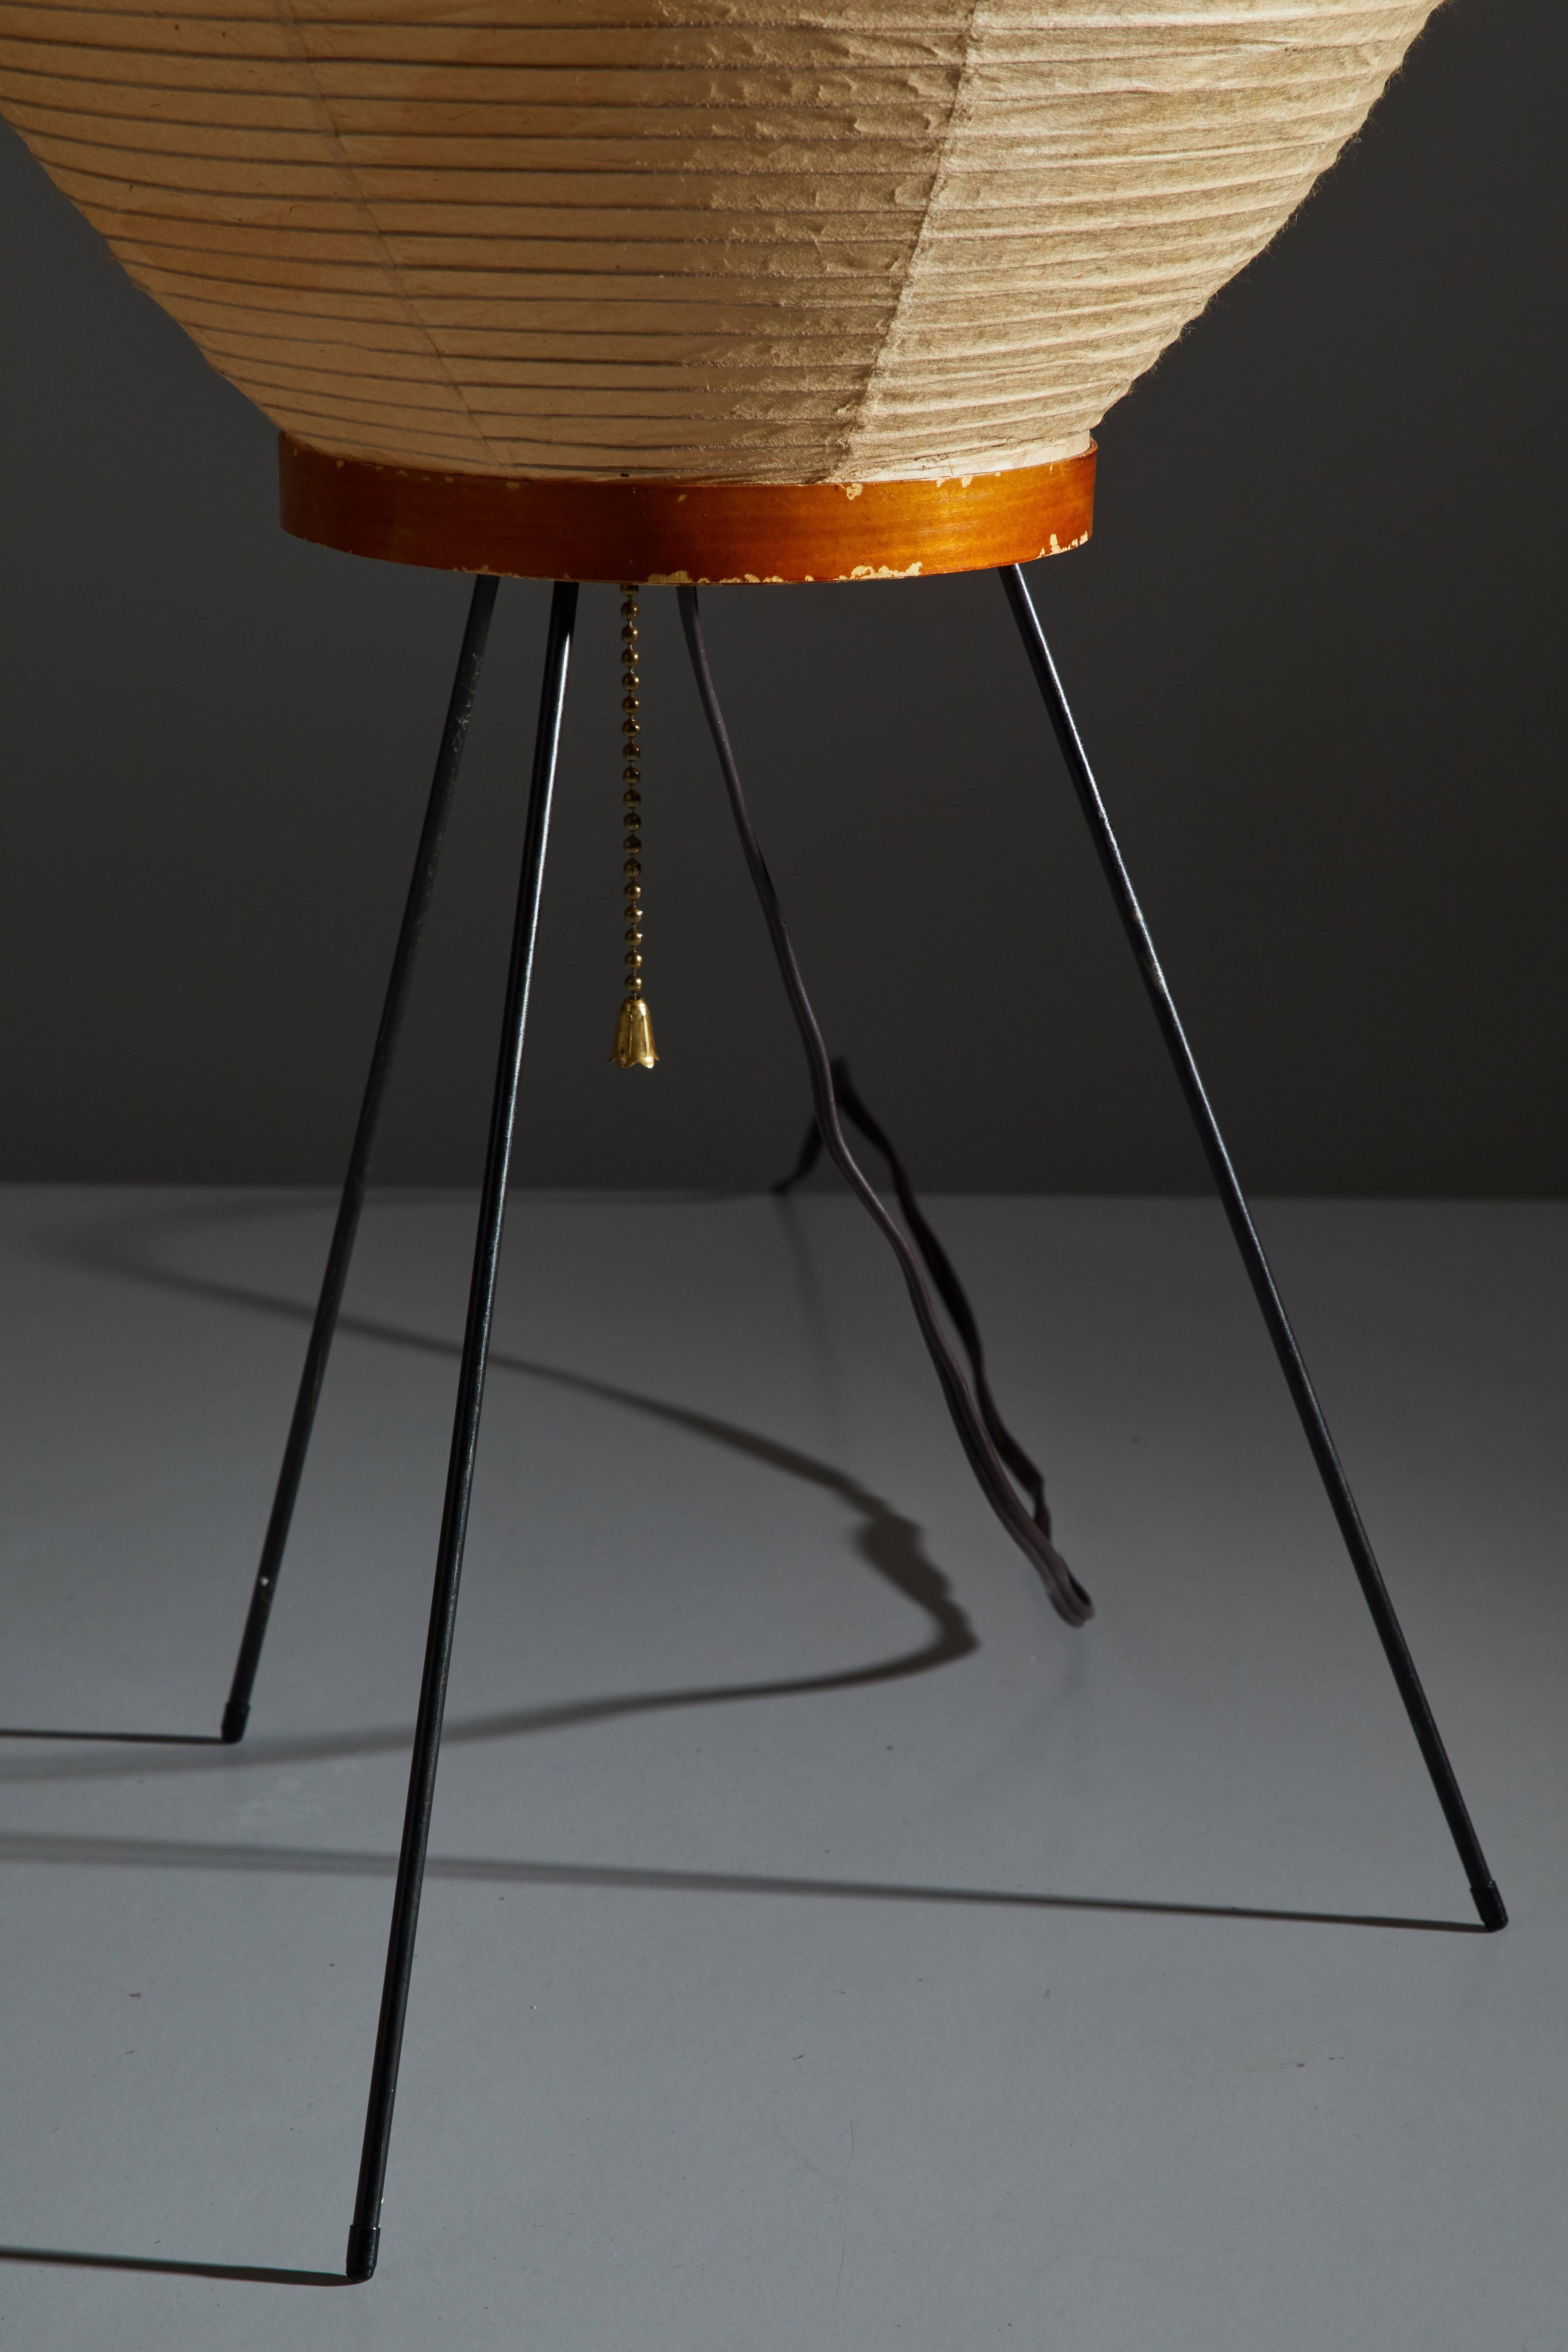 Mid-20th Century Model 3A Table Lamp by Isamu Noguchi for Akari